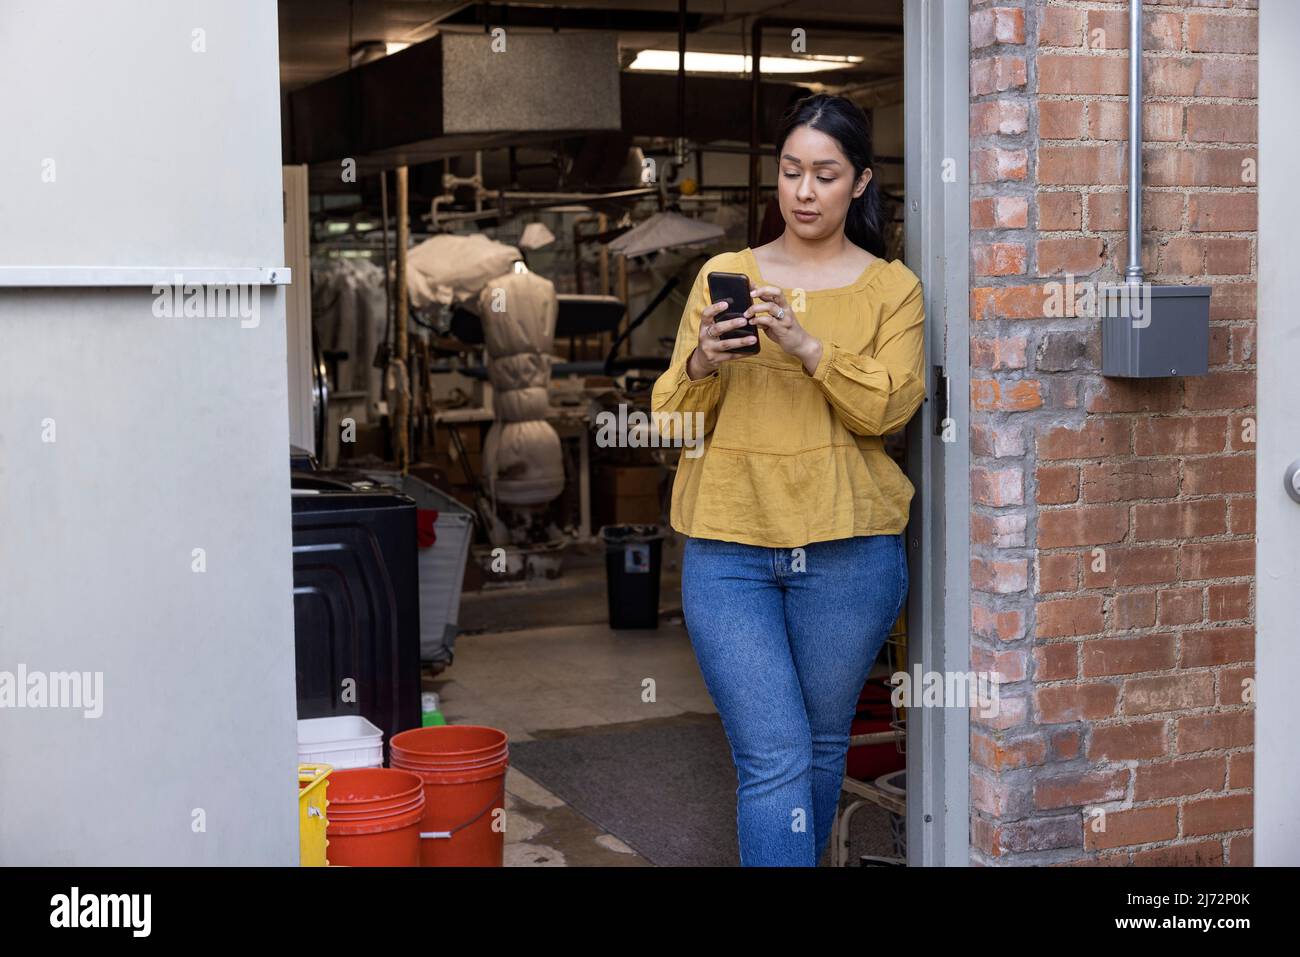 Young woman working in dry cleaners taking break in back room and using cell phone. Stock Photo